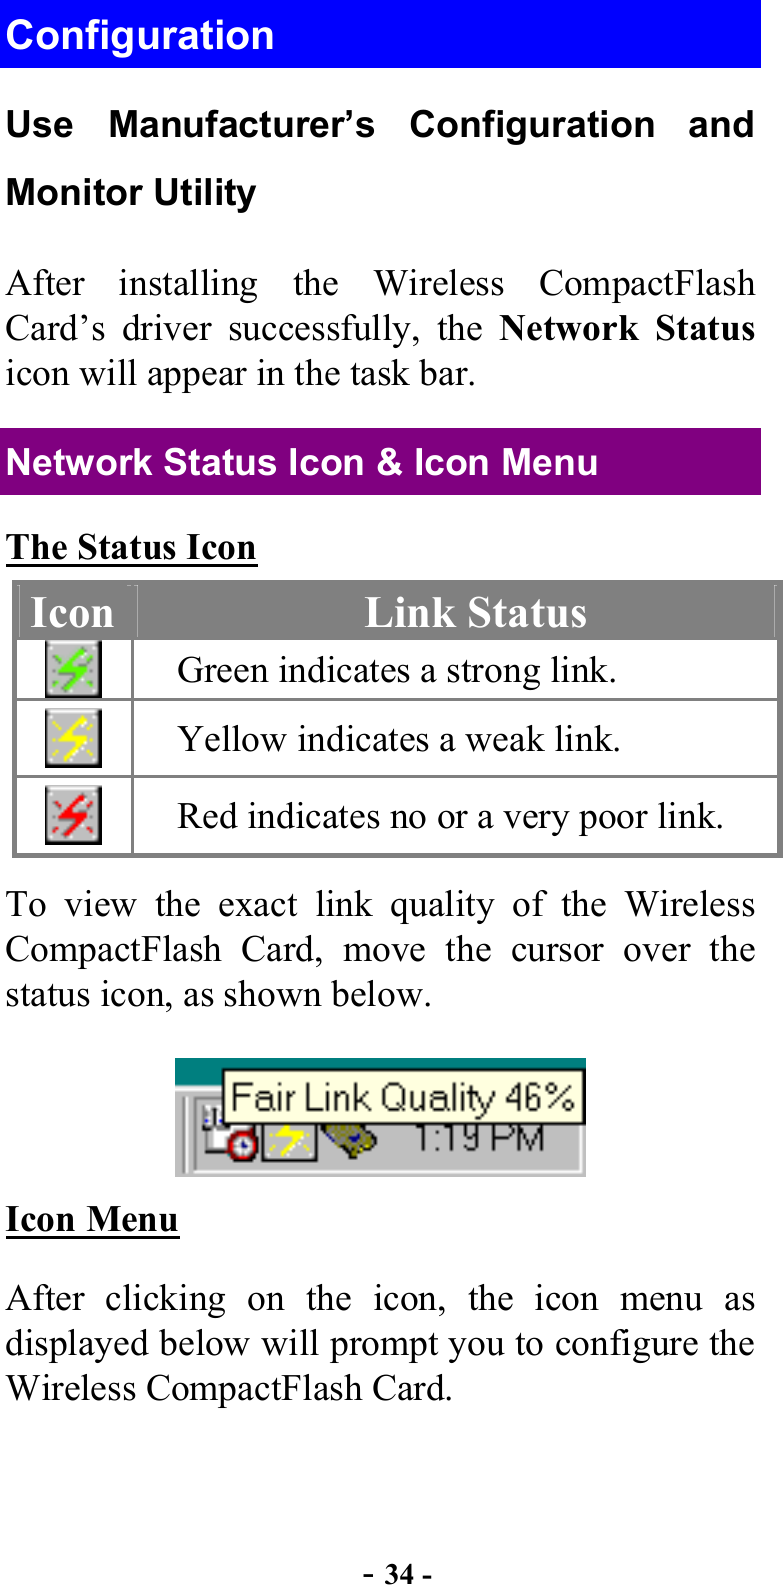  - 34 - Configuration Use Manufacturer’s Configuration and Monitor Utility After installing the Wireless CompactFlash Card’s driver successfully, the Network Status icon will appear in the task bar. Network Status Icon &amp; Icon Menu The Status Icon Icon  Link Status  Green indicates a strong link.  Yellow indicates a weak link.  Red indicates no or a very poor link. To view the exact link quality of the Wireless CompactFlash Card, move the cursor over the status icon, as shown below.  Icon Menu After clicking on the icon, the icon menu as displayed below will prompt you to configure the Wireless CompactFlash Card. 